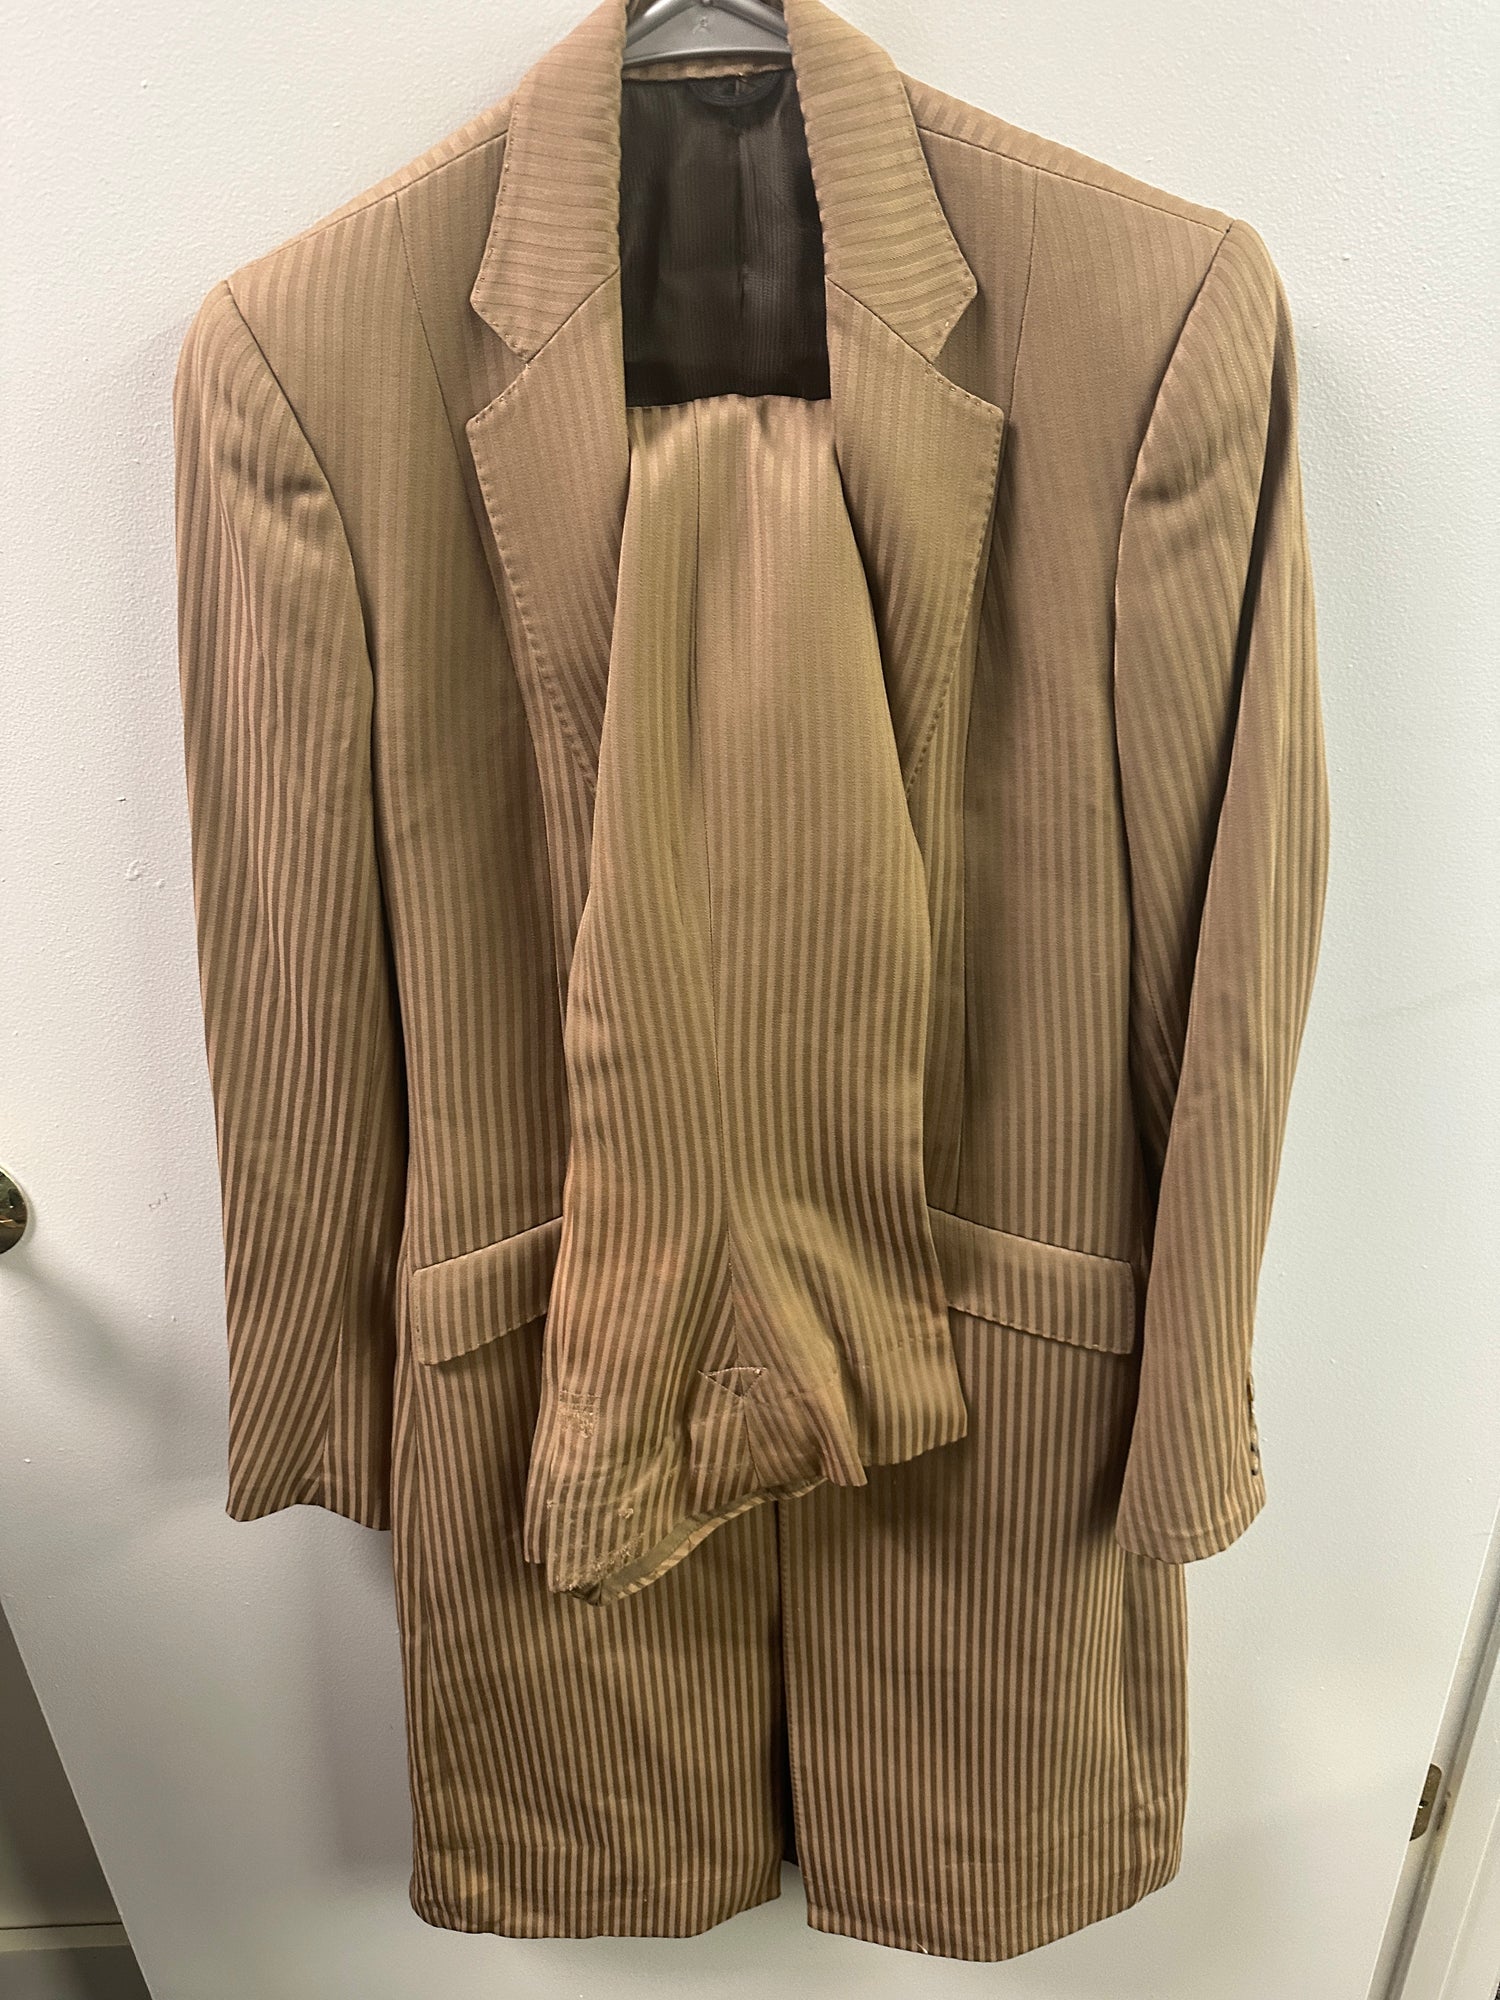 14+ Women's Saddleseat Suit with pants Brown Stripe